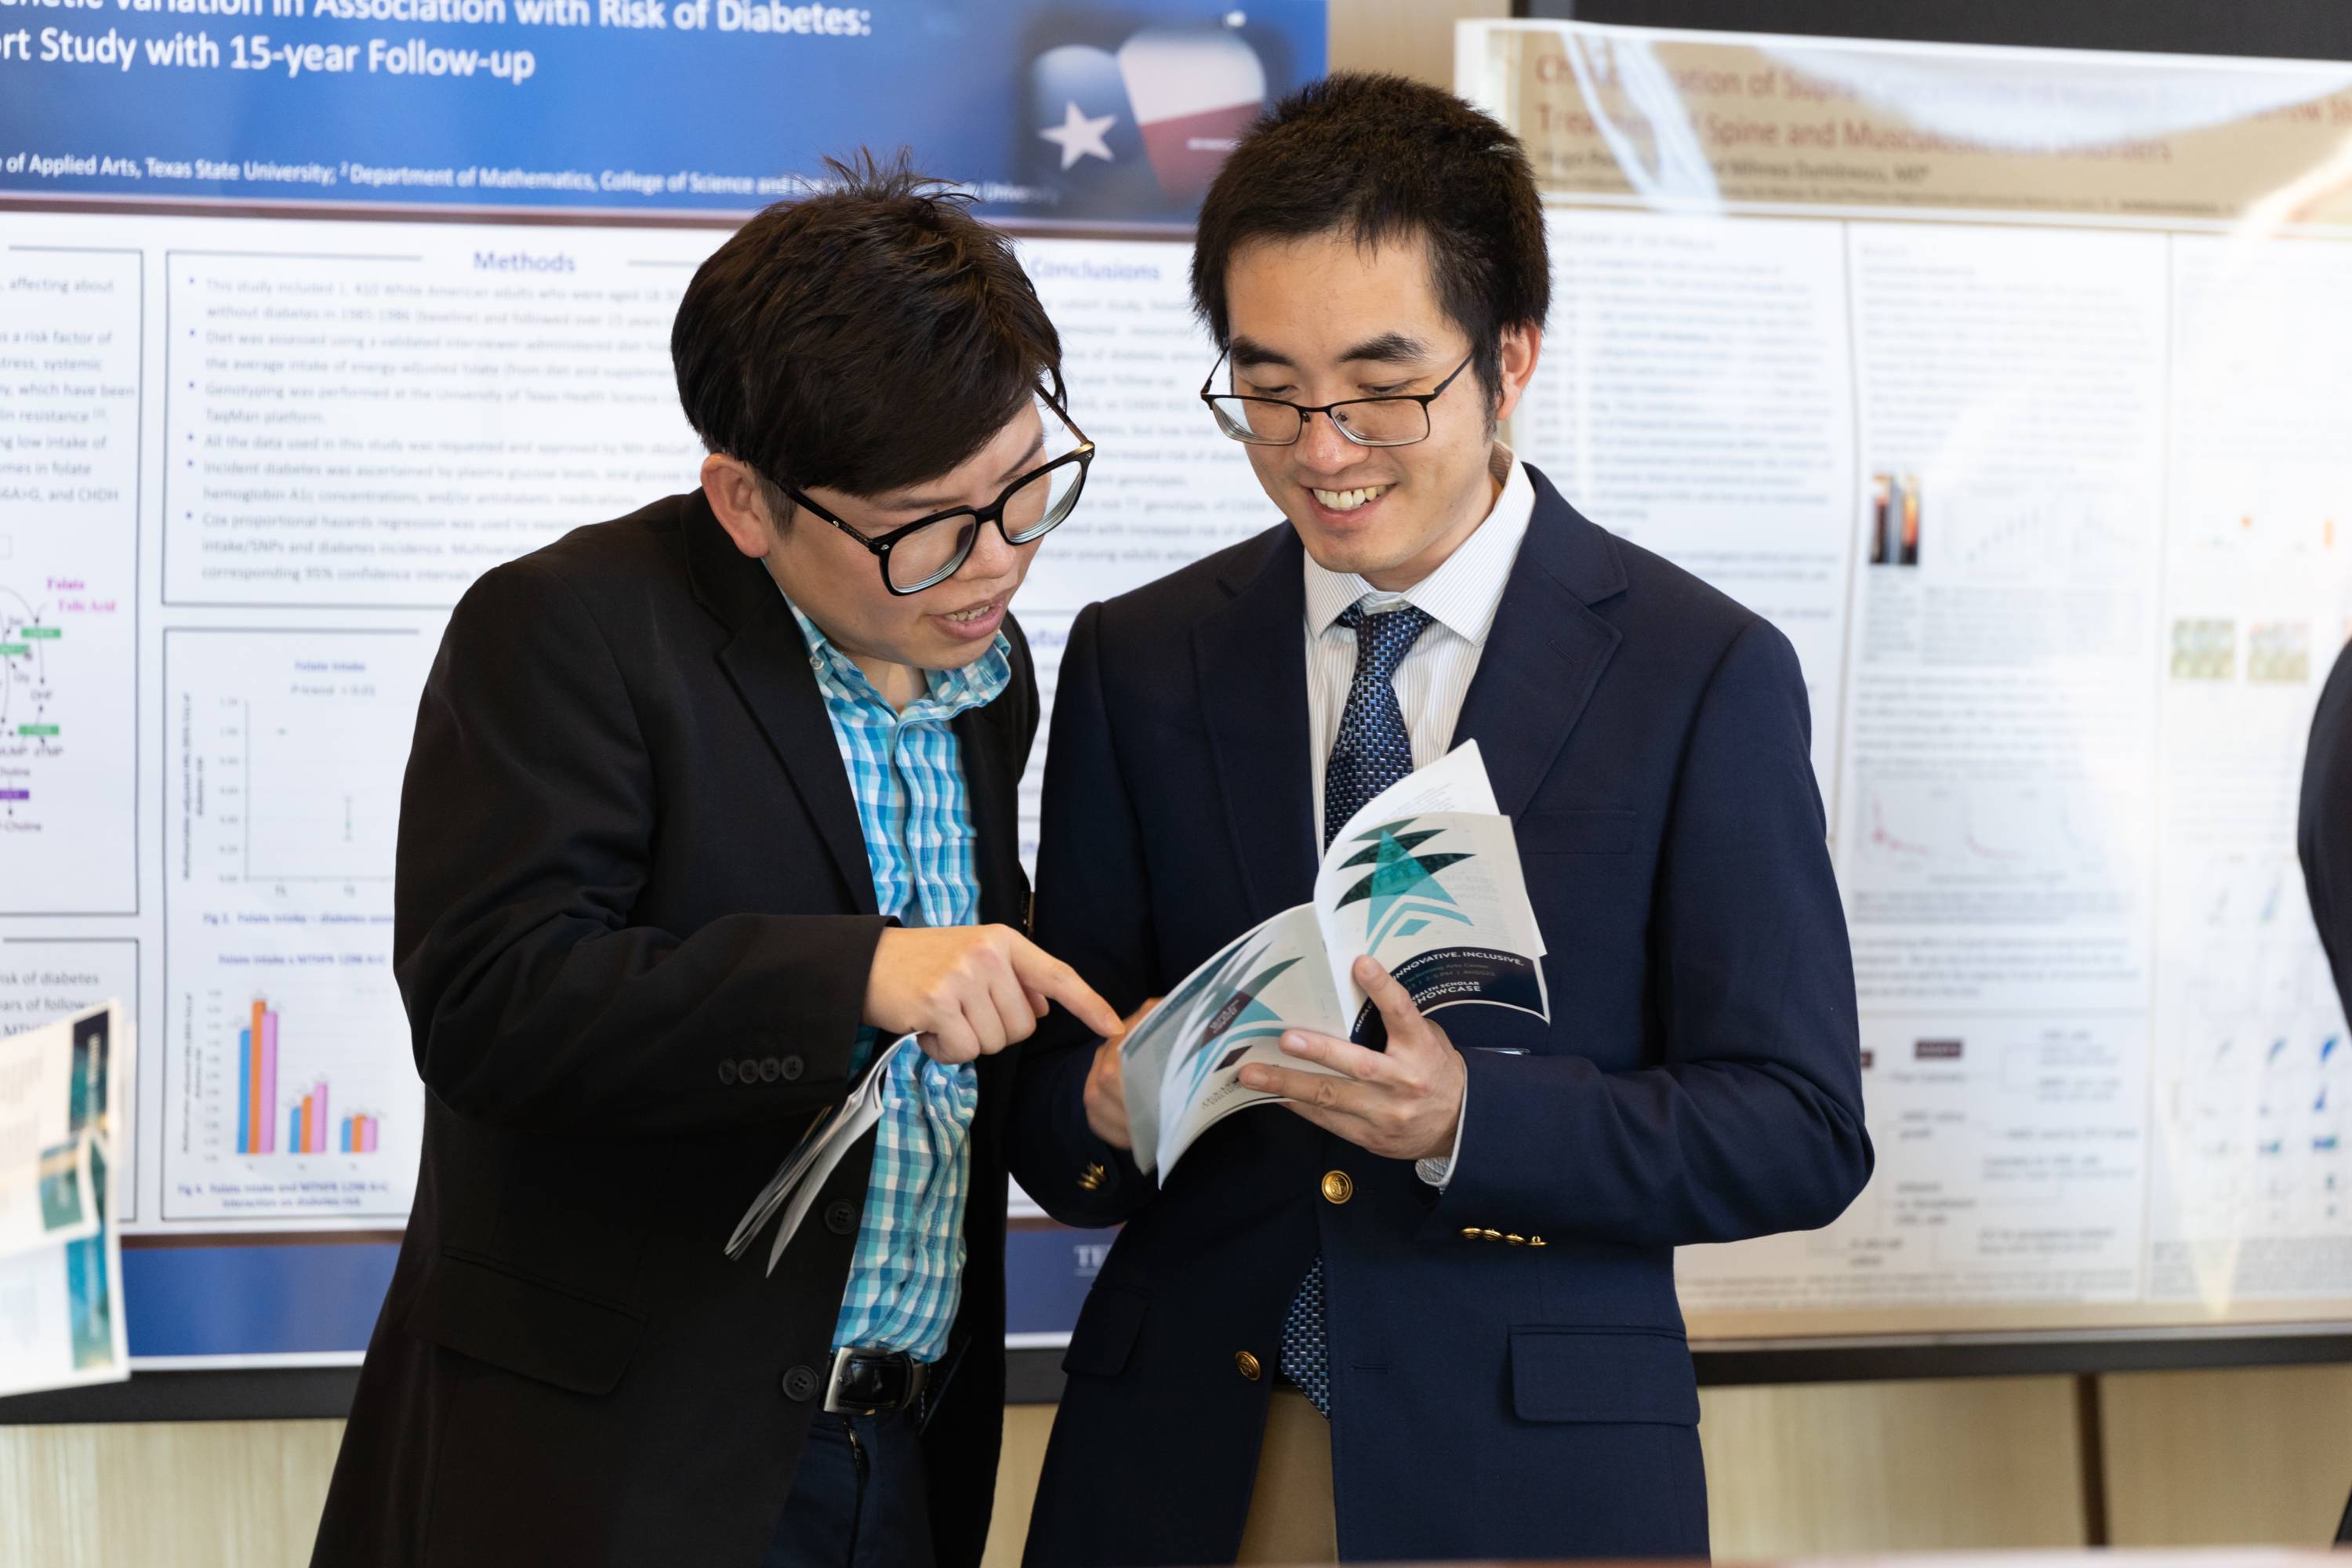 Two Showcase attendees look at the event brochure. Two health research posters can be seen behind them.